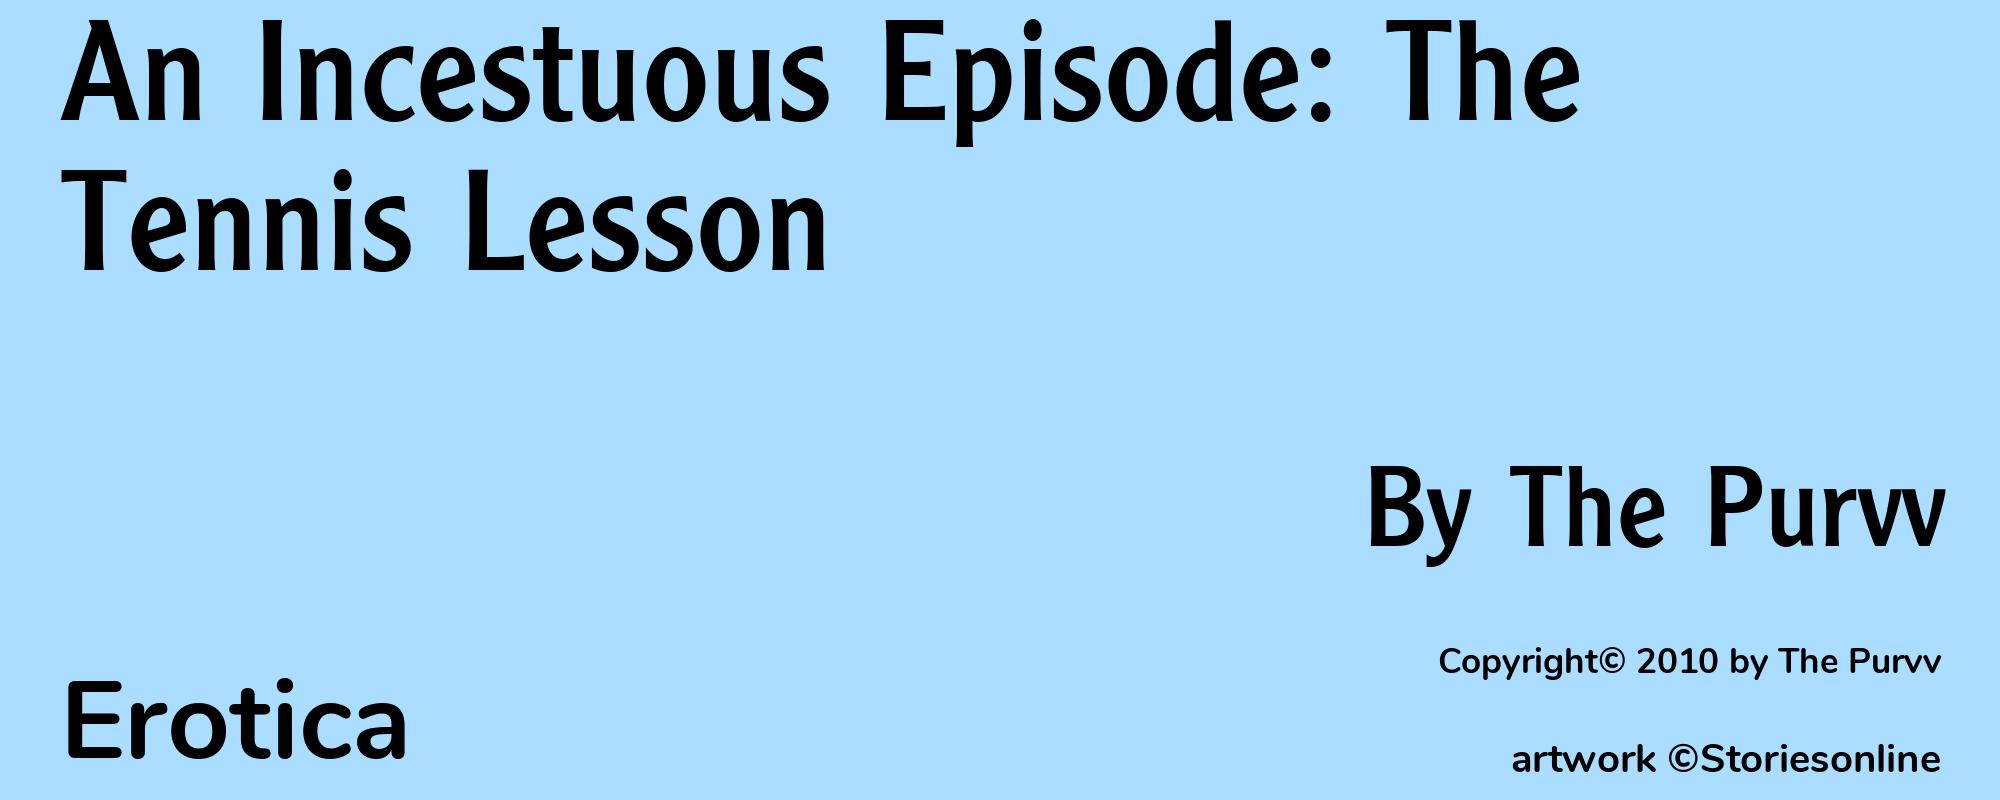 An Incestuous Episode: The Tennis Lesson - Cover